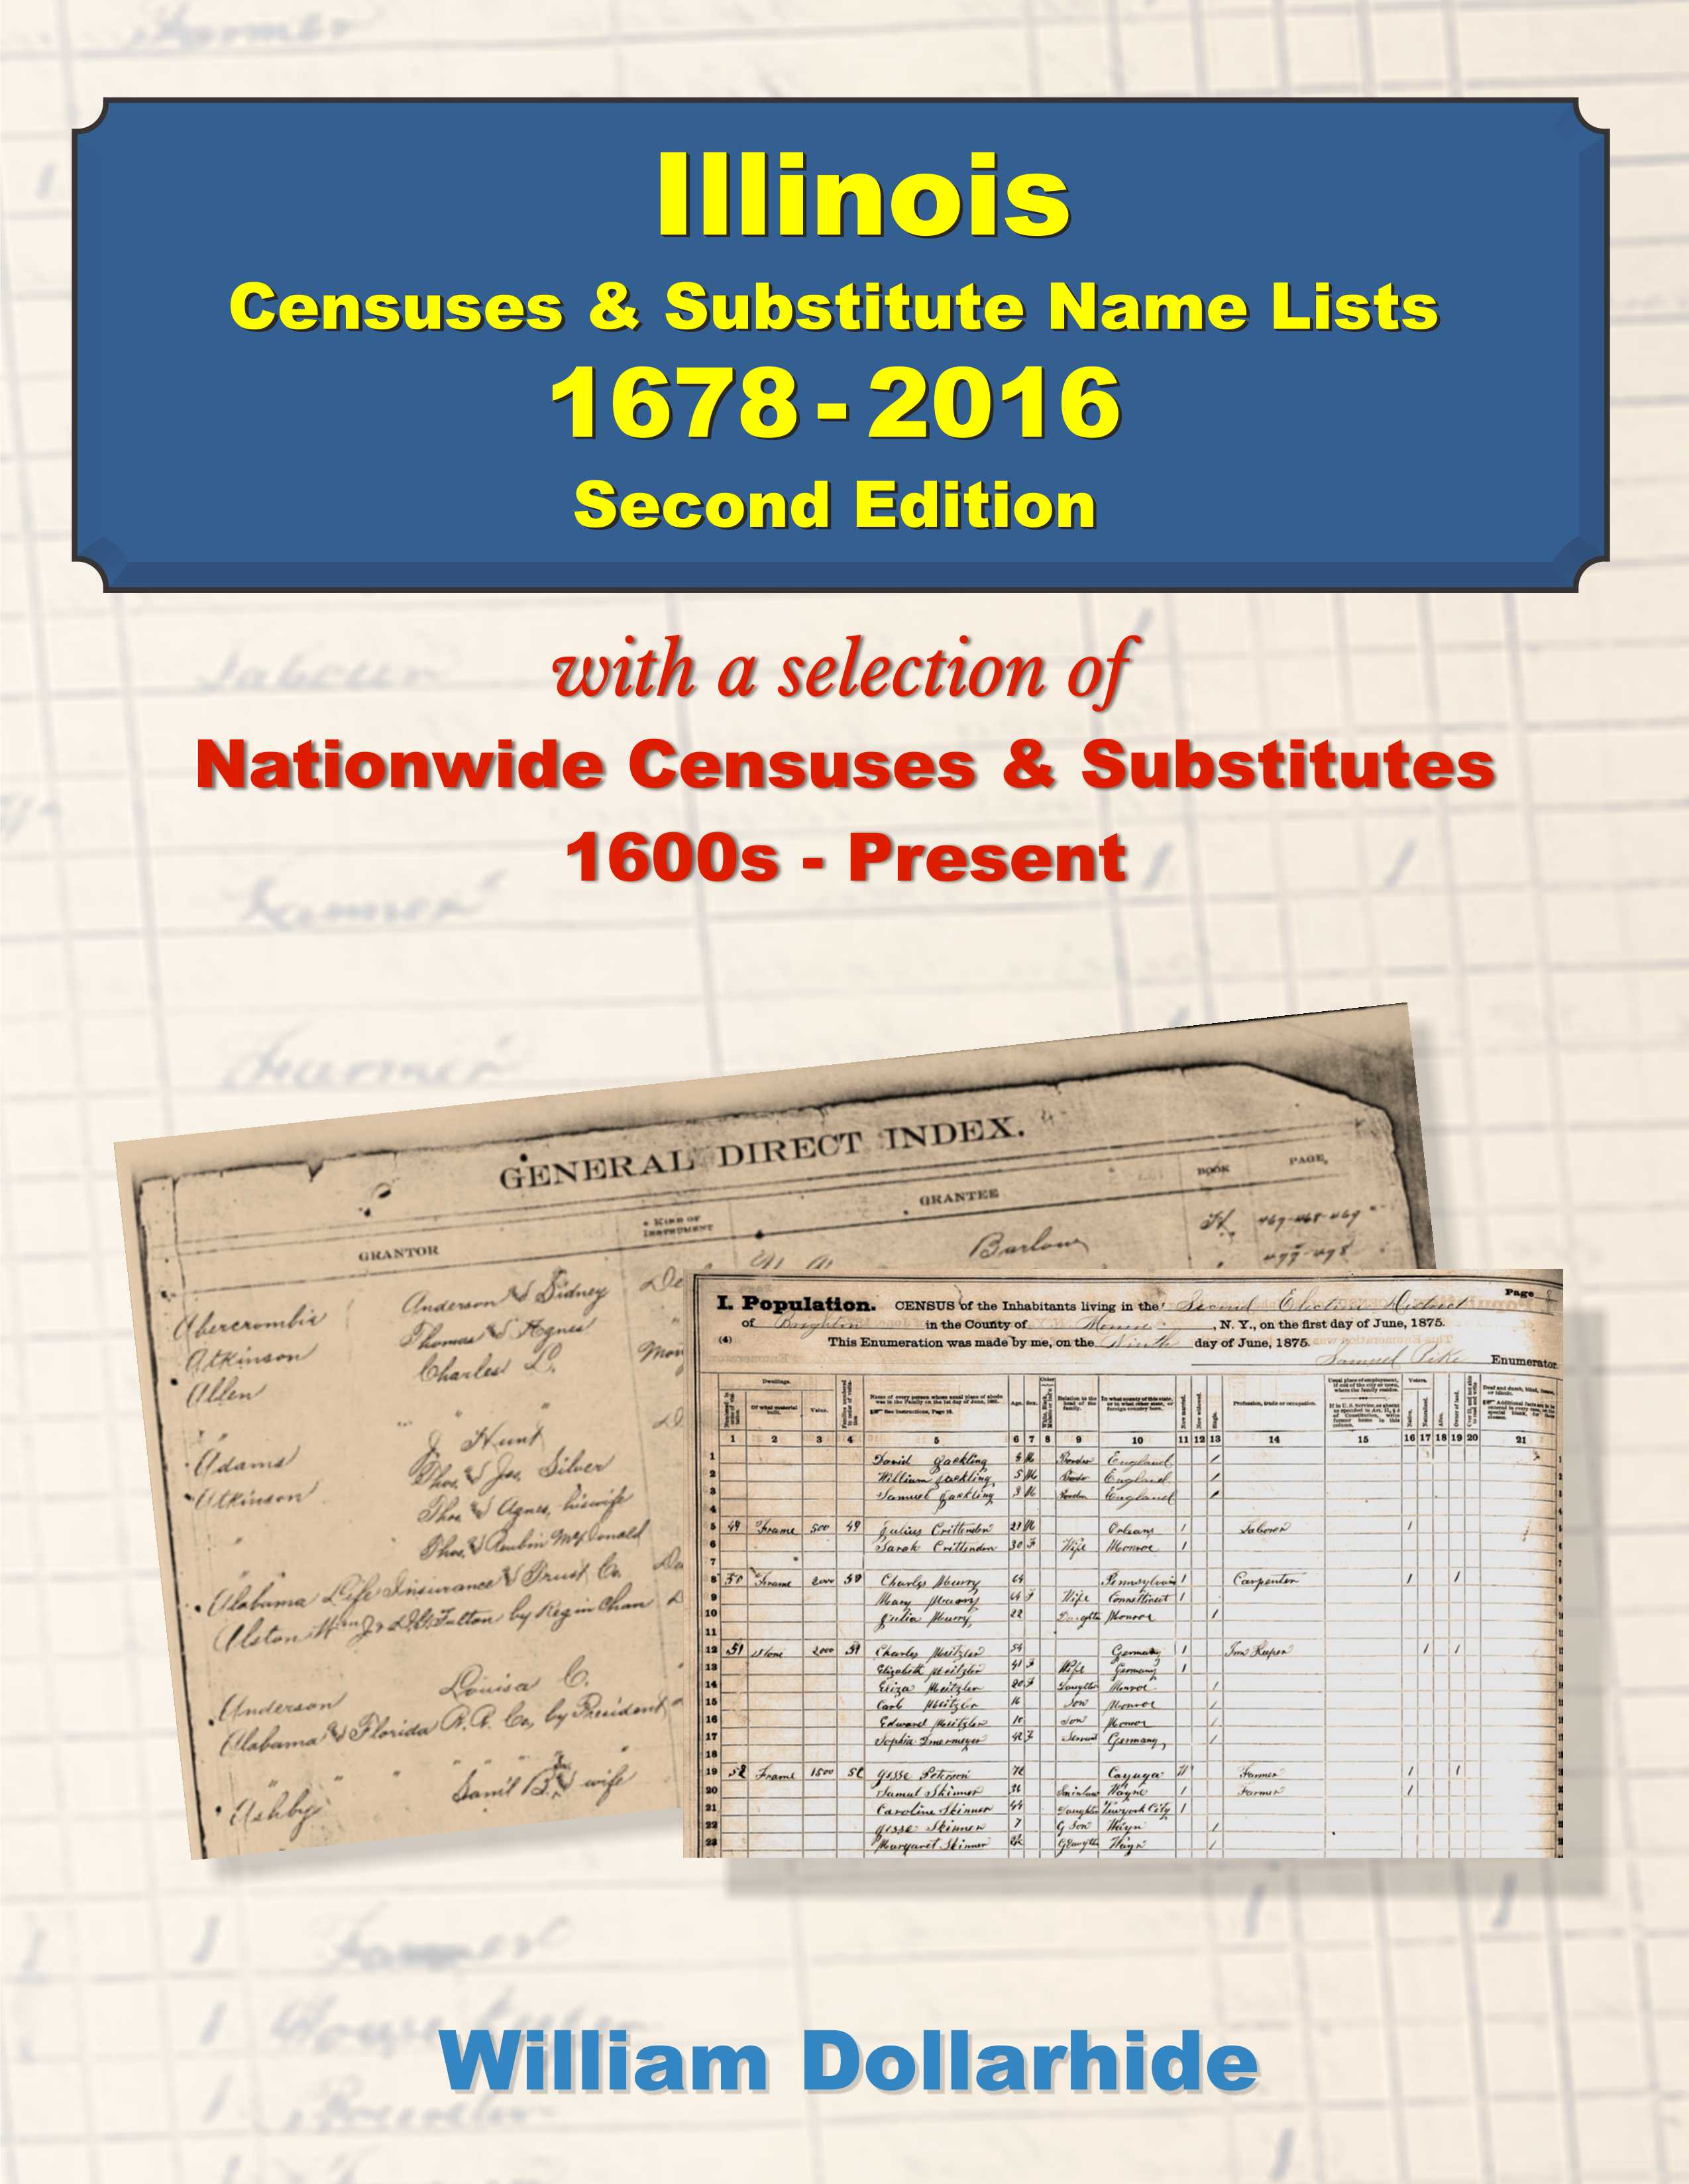 Illinois Censuses & Substitute Name Lists, 1678-2016 - Second Edition